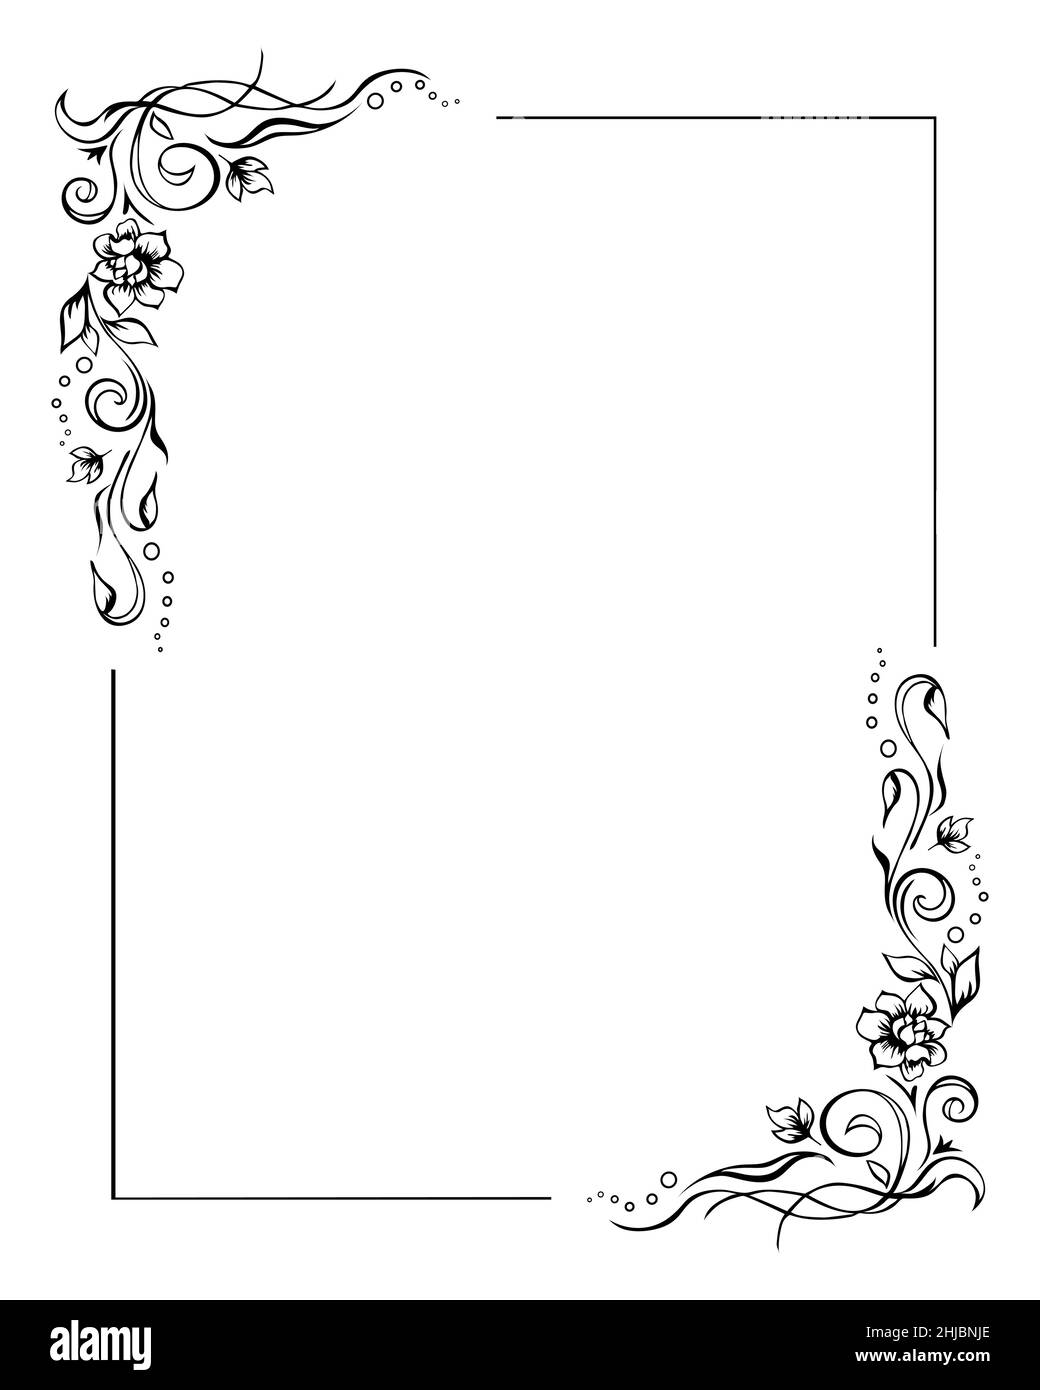 Rectangular floral frame, rose border template with flourishes in two corners. Elegant hand-drawn decorative elements, foliage and blossom. Editable Stock Vector